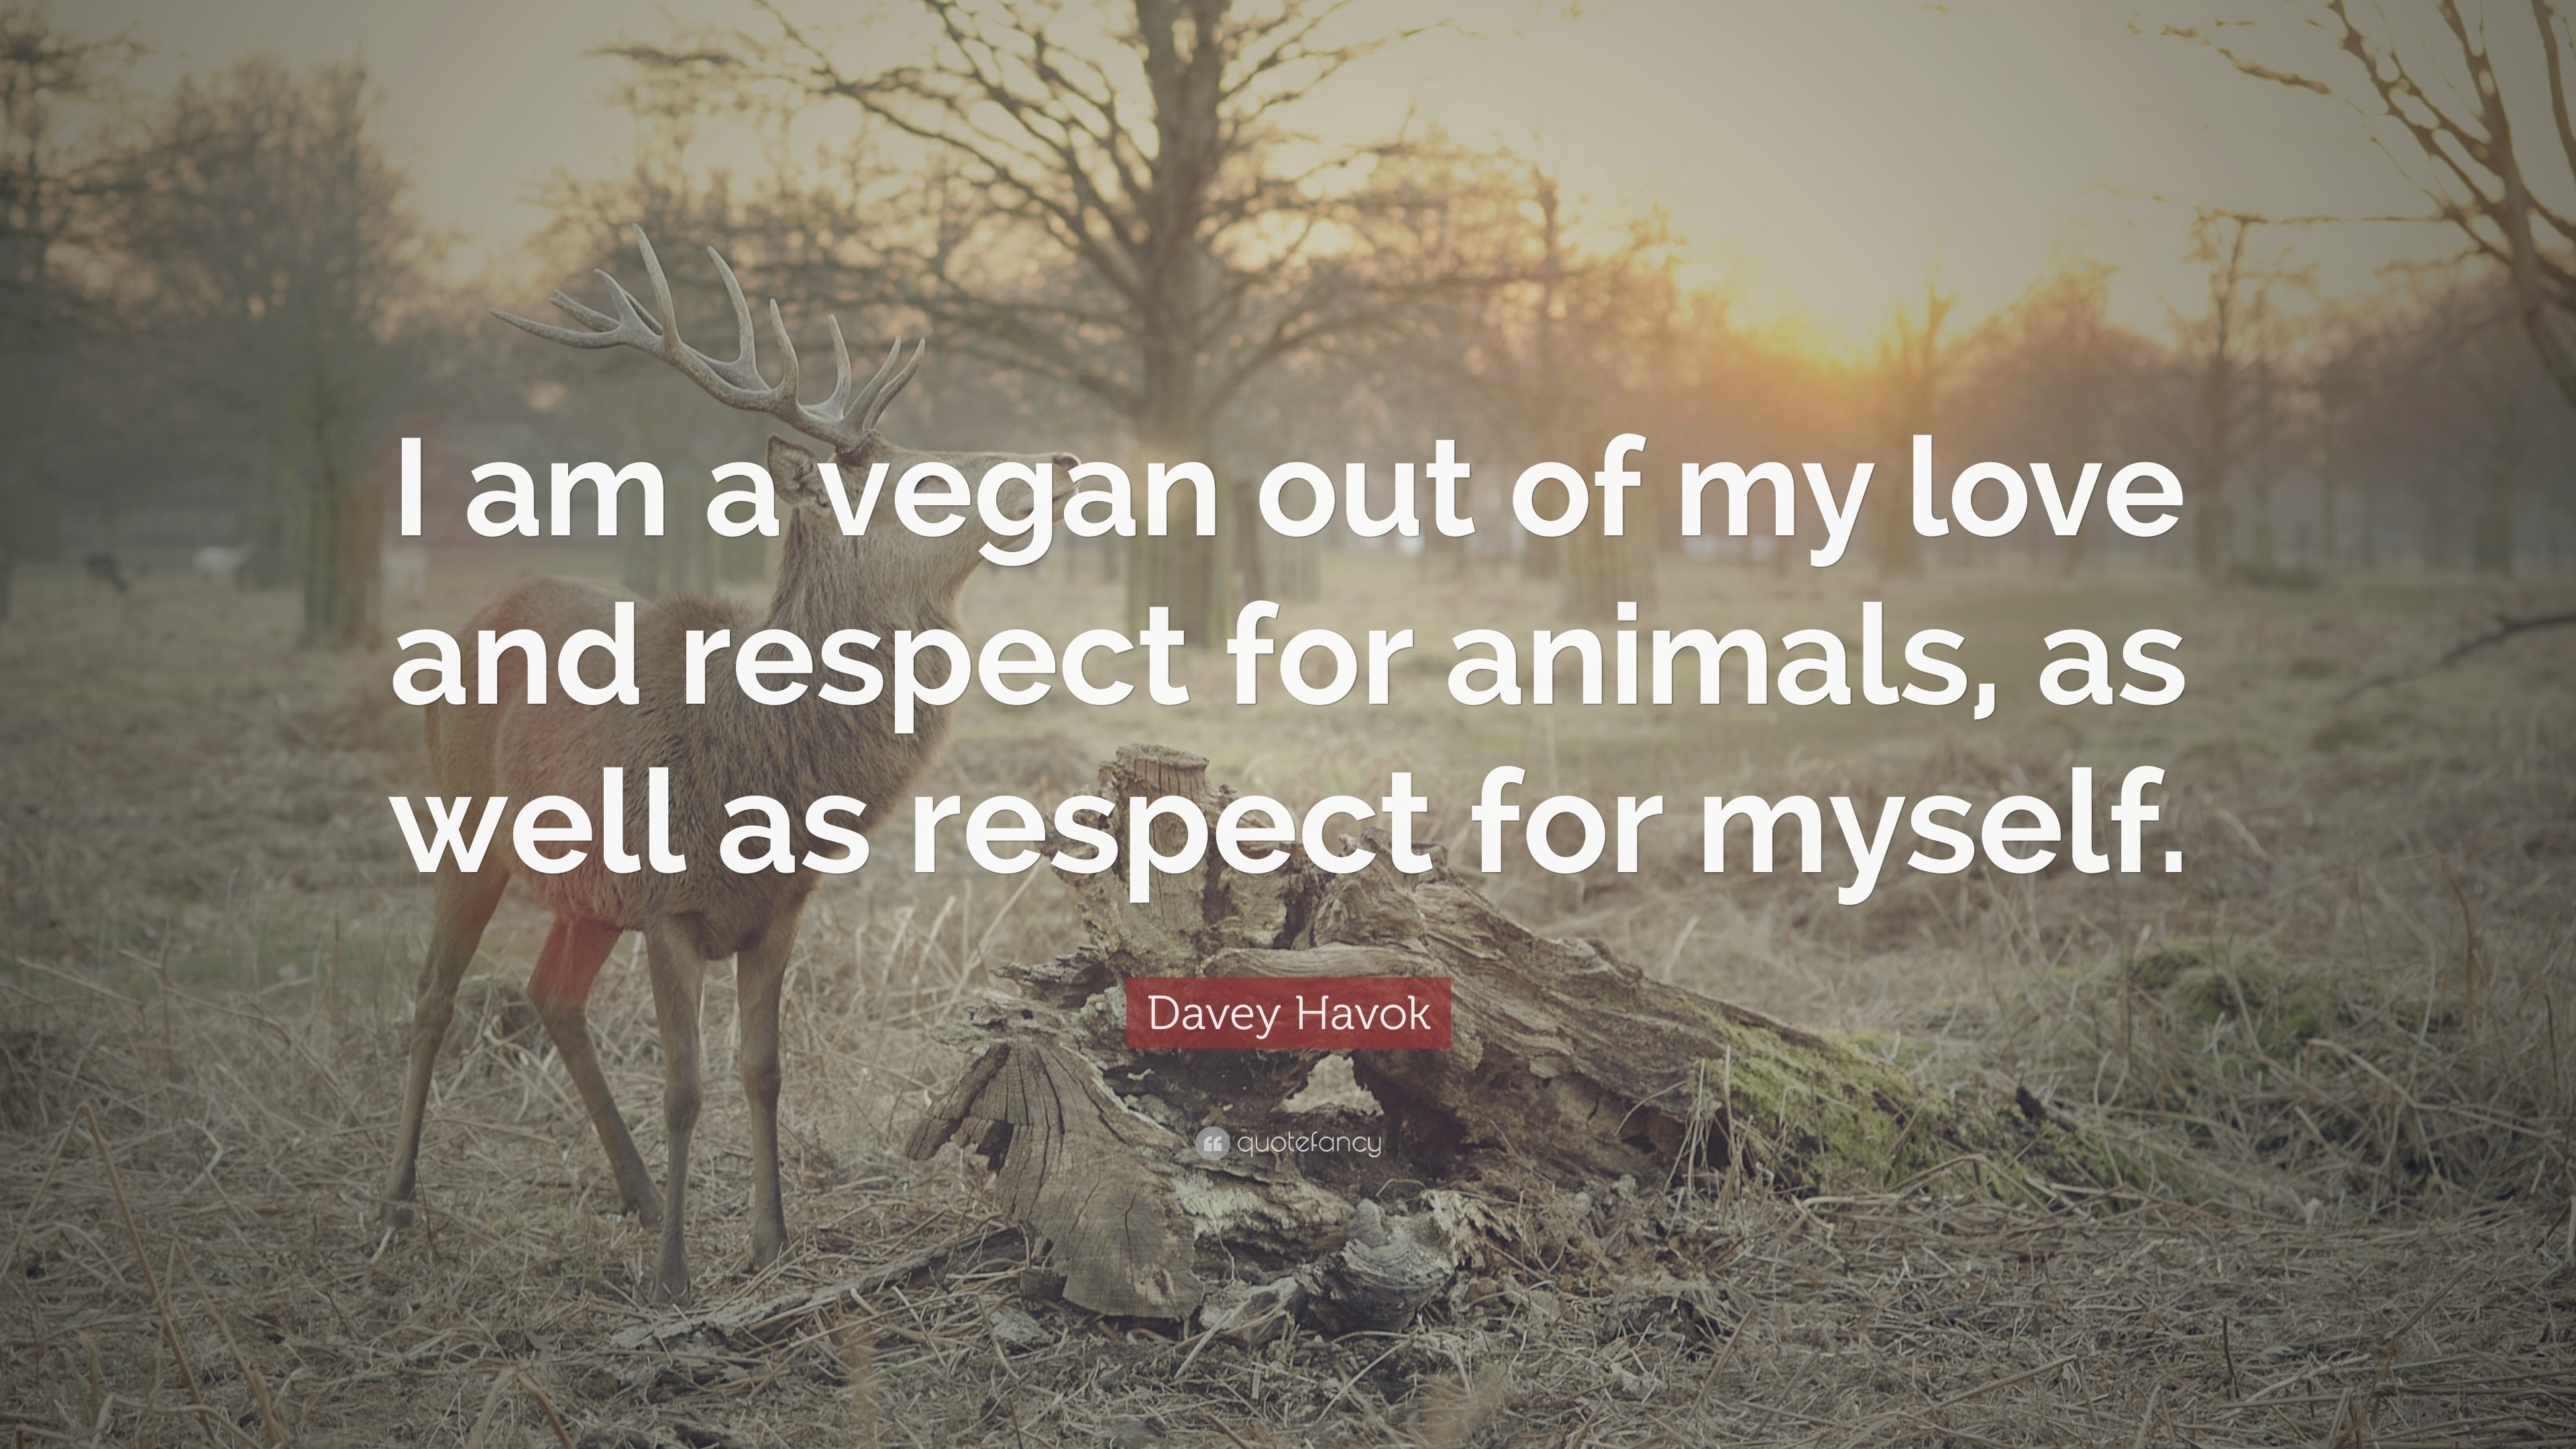 3840x2160 Davey Havok Quote: “I am a vegan out of my love and respect for